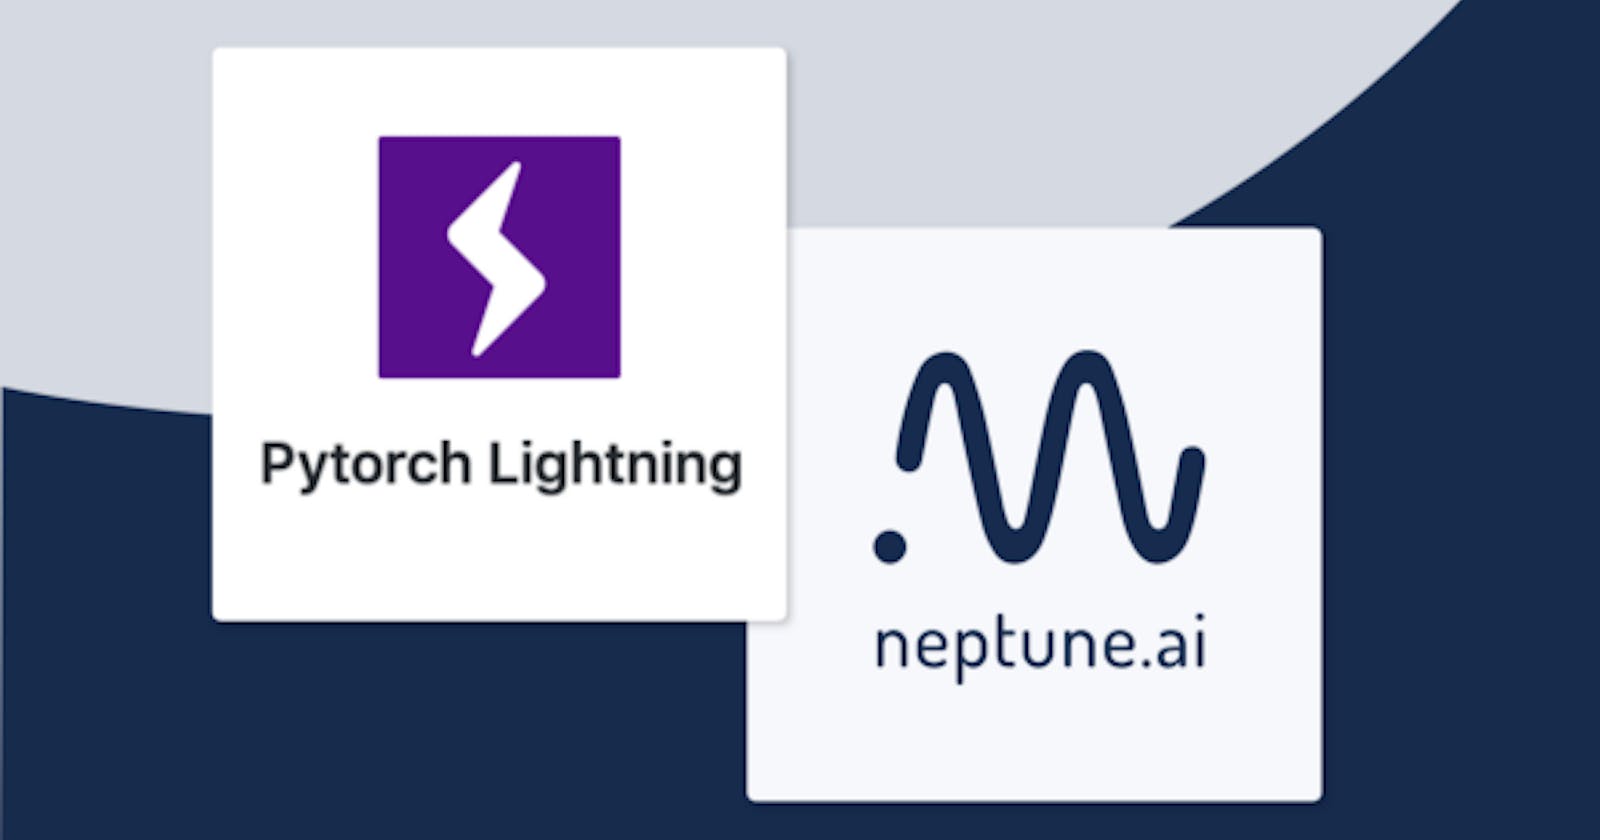 How to Keep Track of PyTorch Lightning Experiments with Neptune